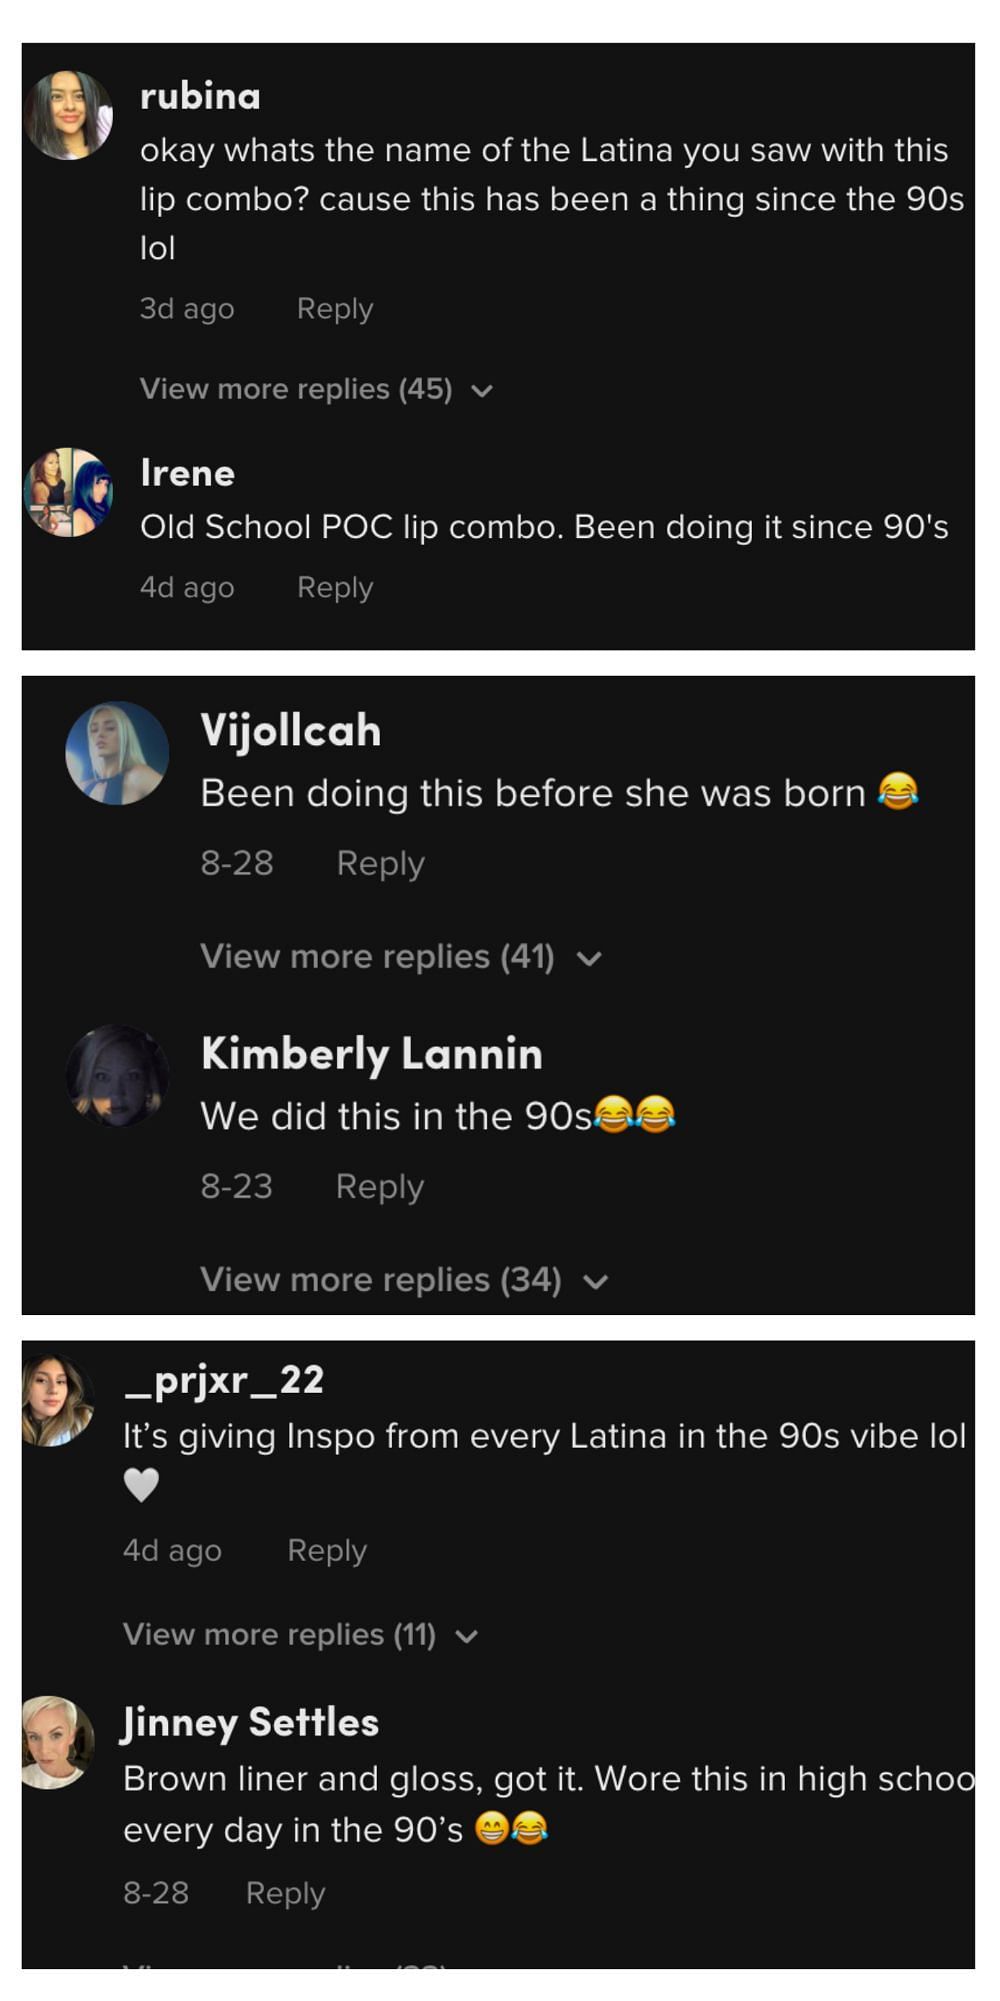 Users on TikTok slam Hailey Bieber for doing something that Latinas have been doing since &quot;high school.&quot; Many ruthlessly bash the model and owner of Rhode Skin. (Image via TikTok)